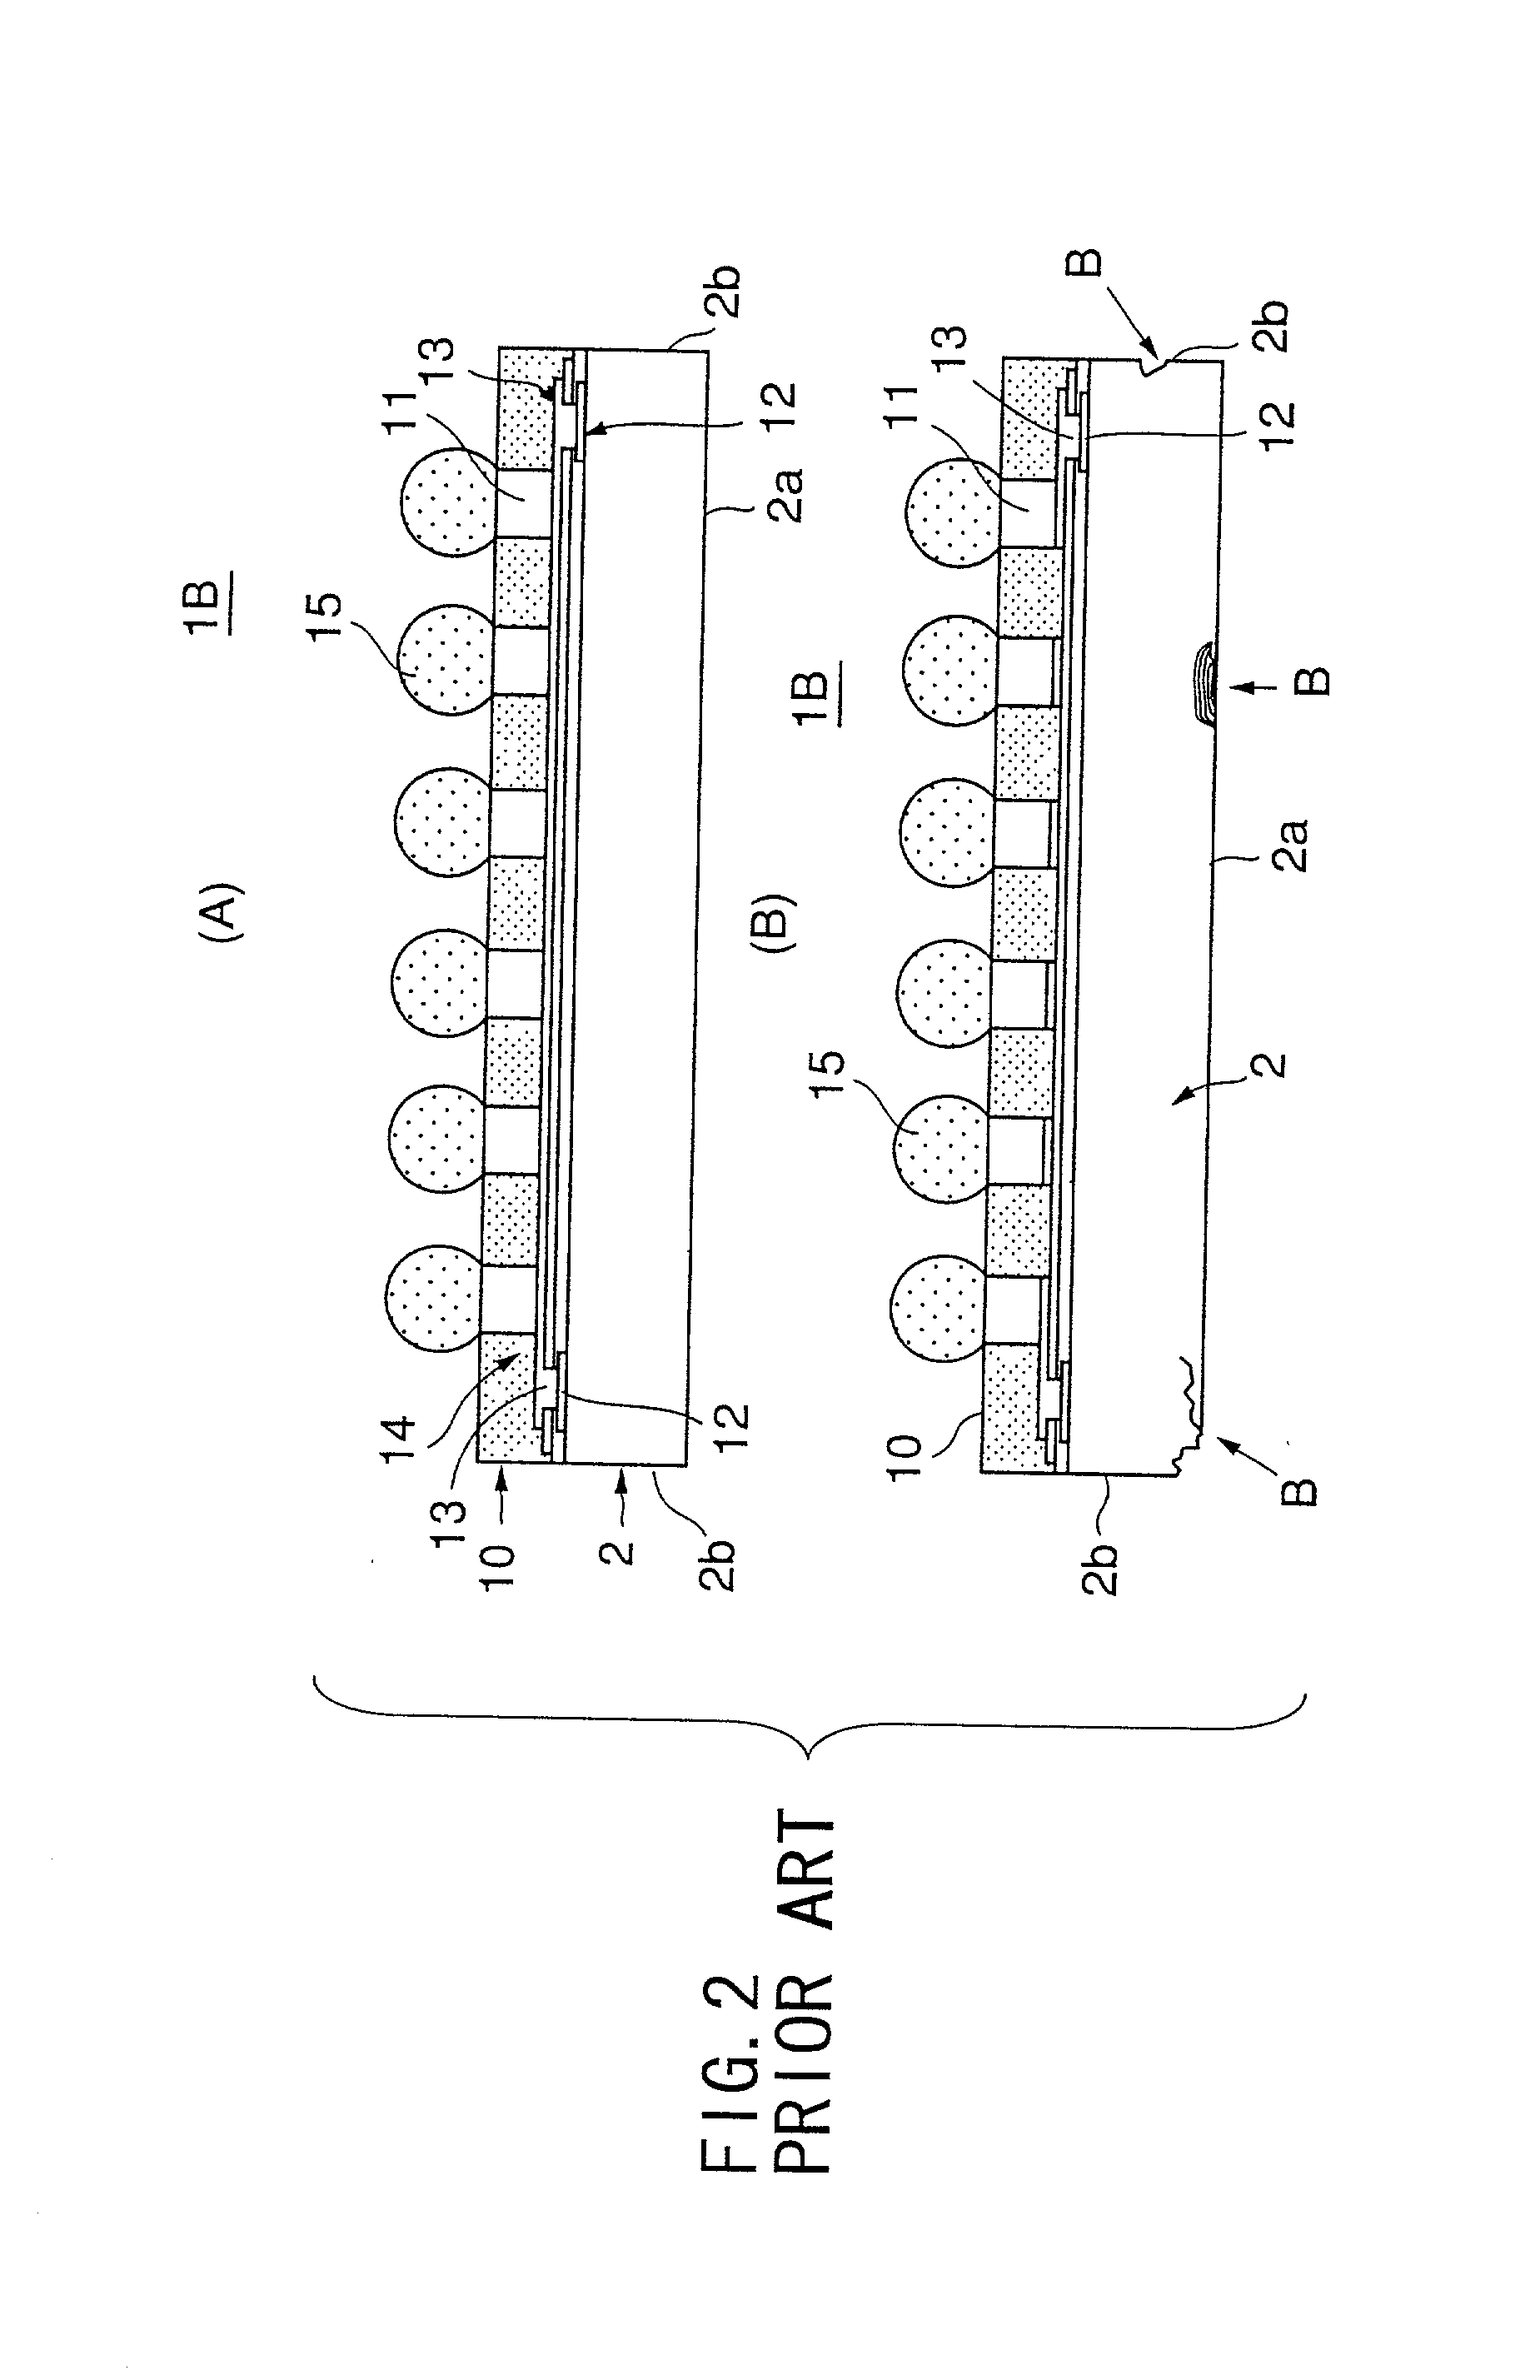 Semiconductor device having an organic material layer and method for making the same